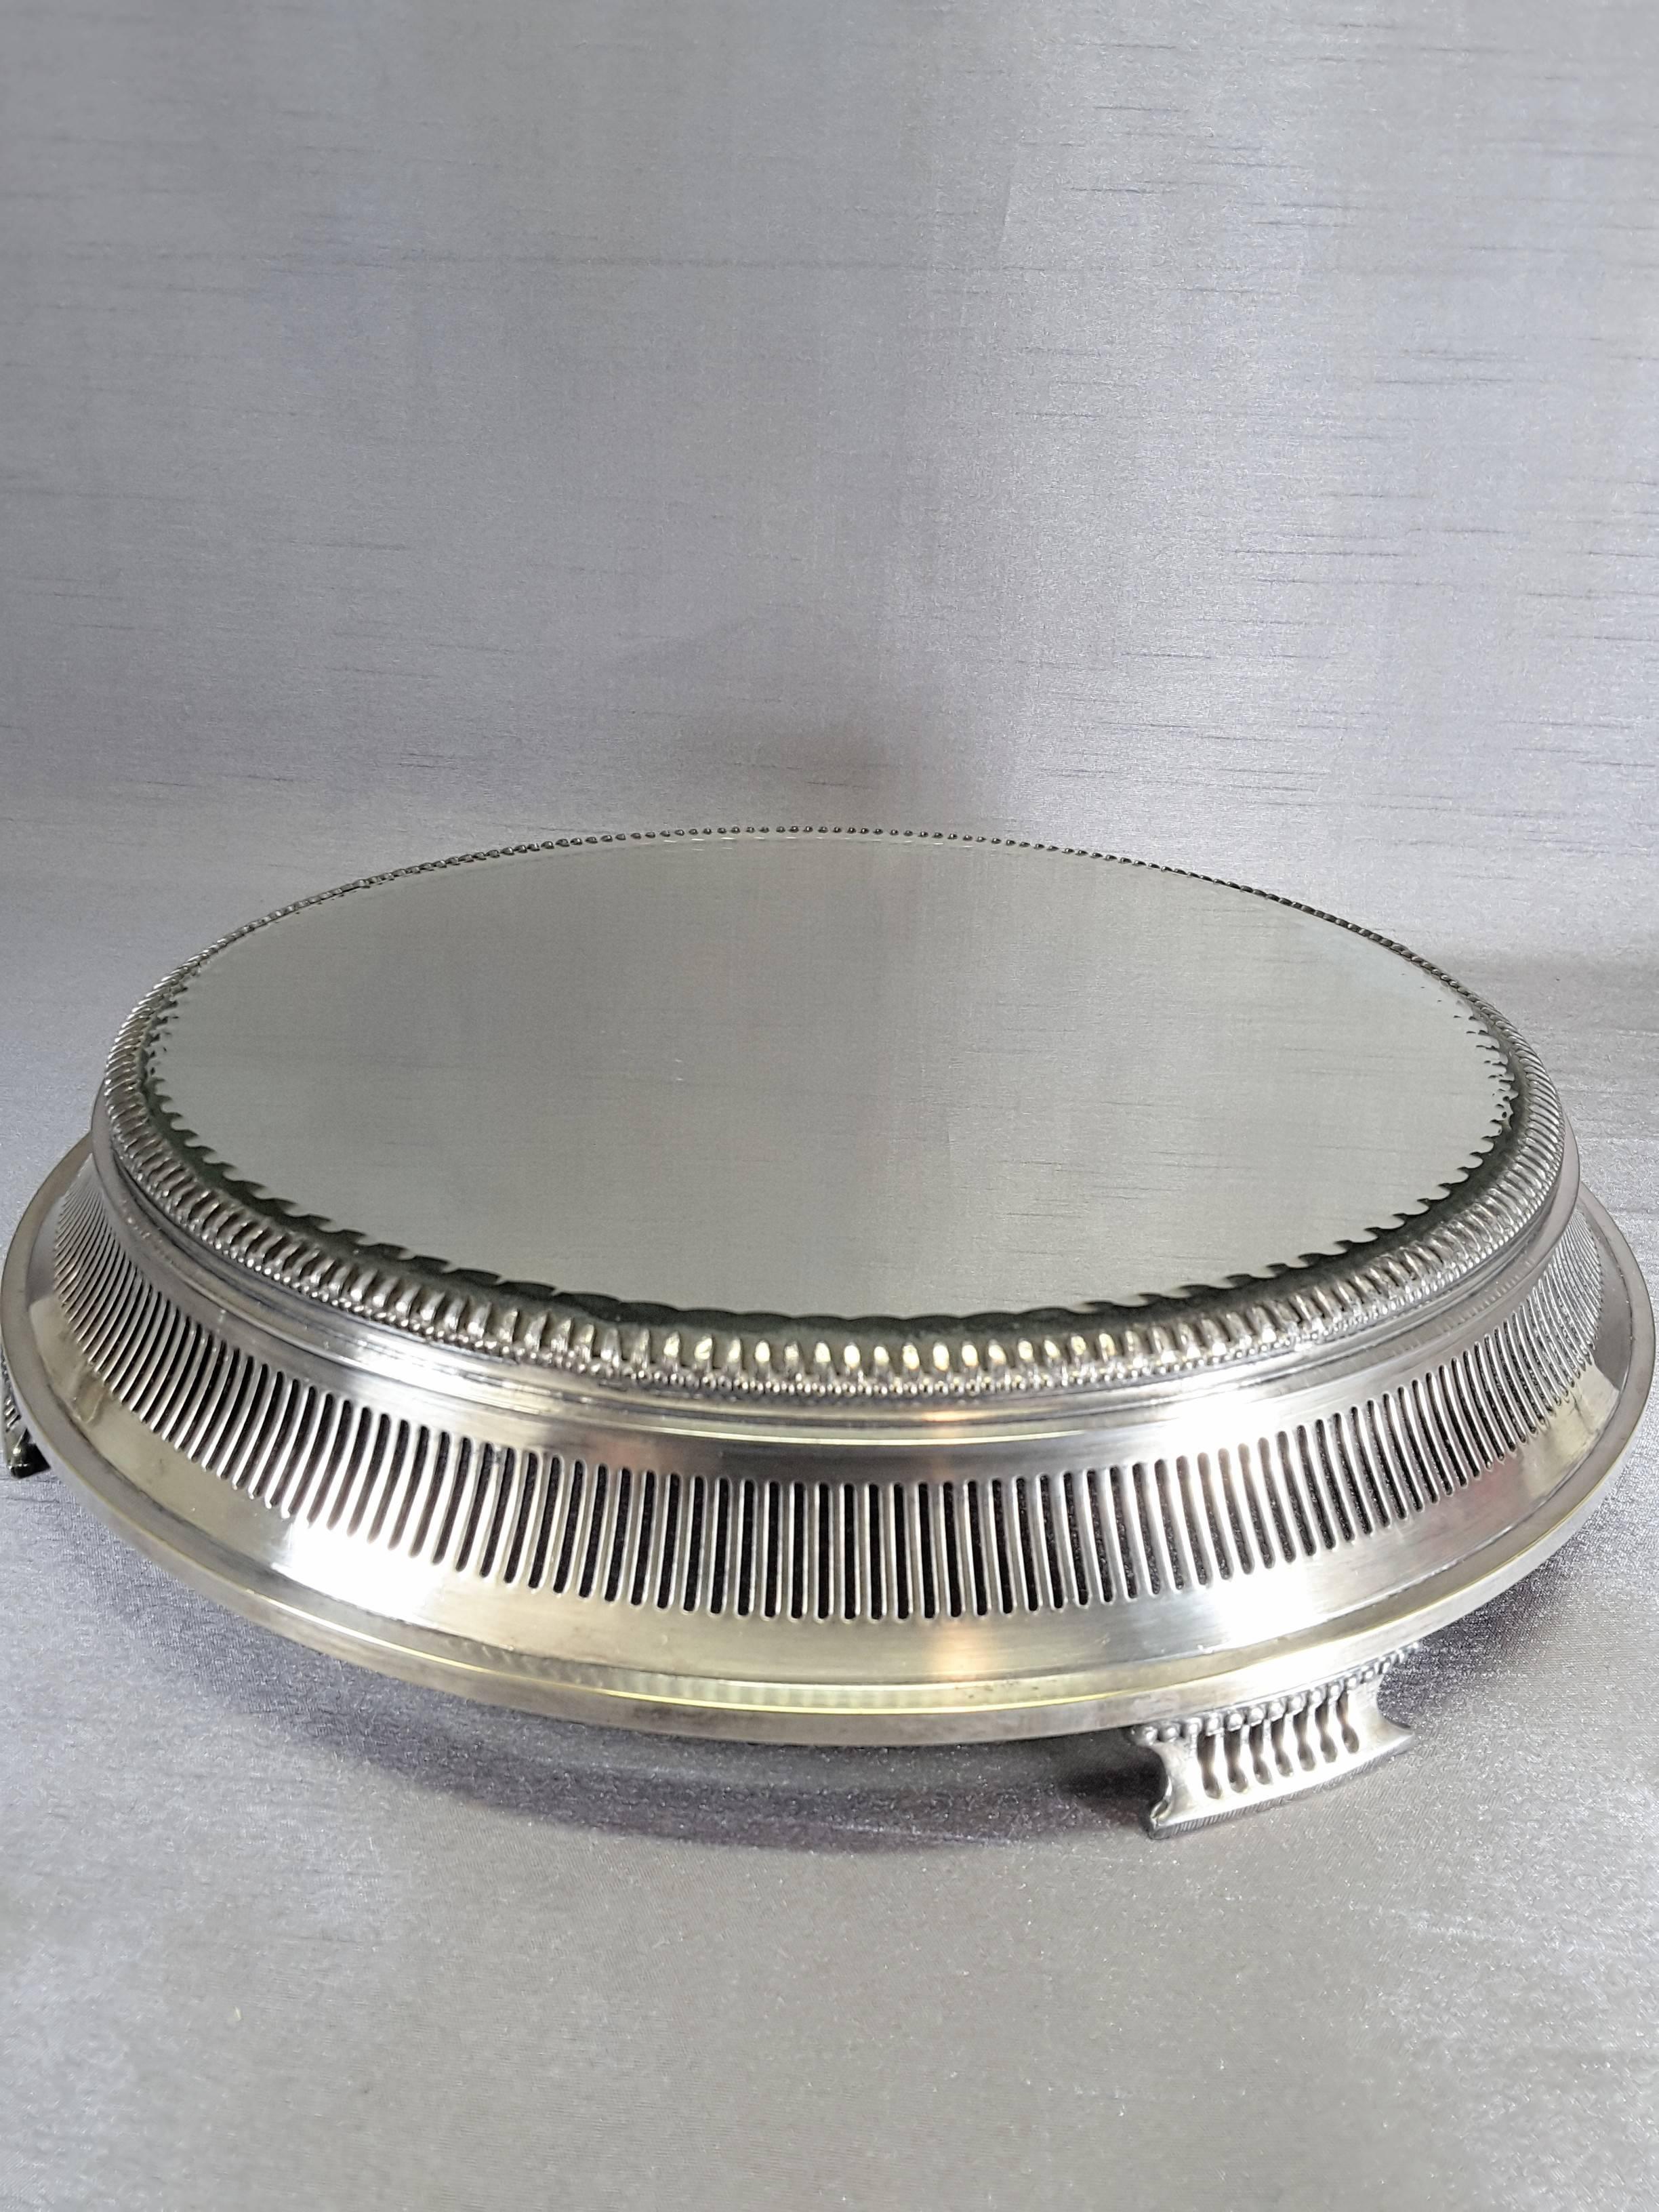 Canadian Edwardian Silver Plate Centrepiece or Wedding Cake Stand